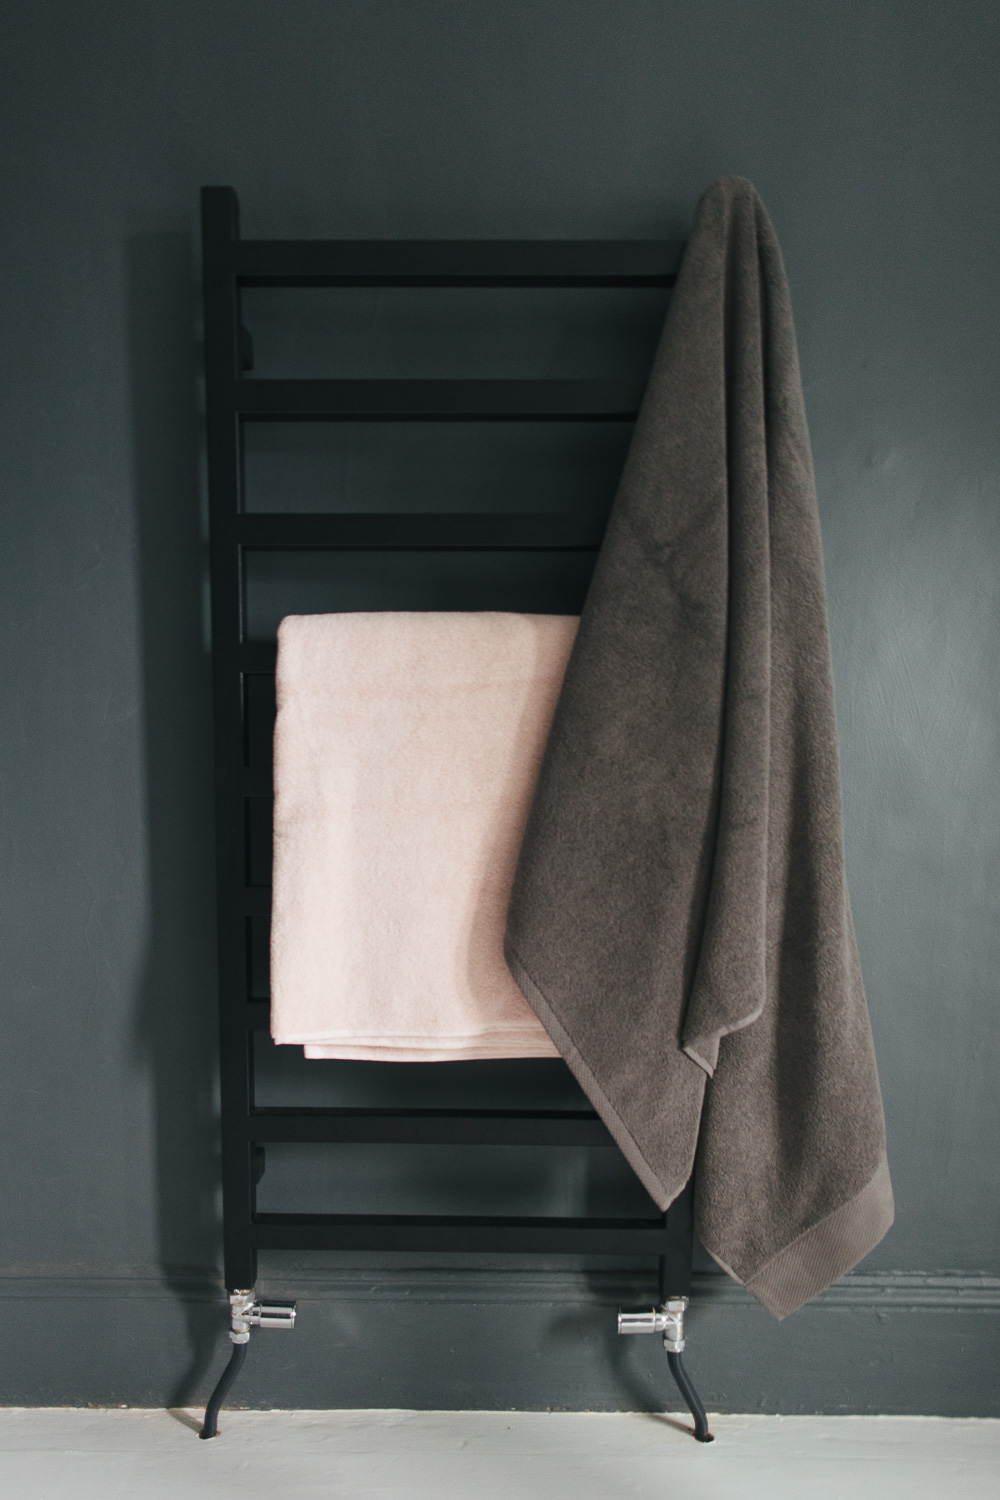 Black towel rail with Christy towels